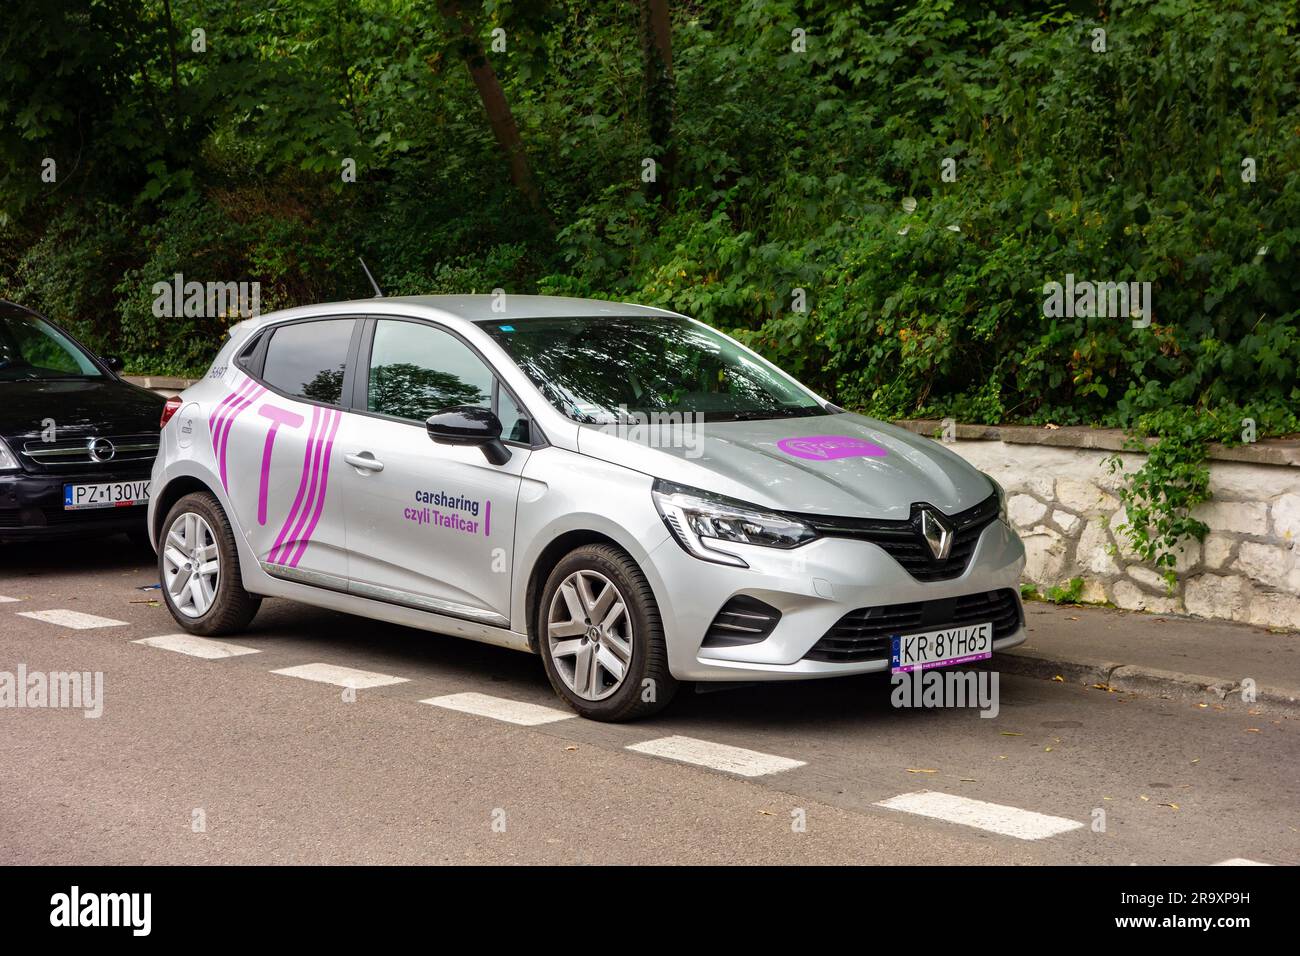 SOPOT, CZECH REPUBLIC - JULY 31, 2022: Renault Clio of Polish Traficar car sharing company in the treets of Sopot, Poland Stock Photo